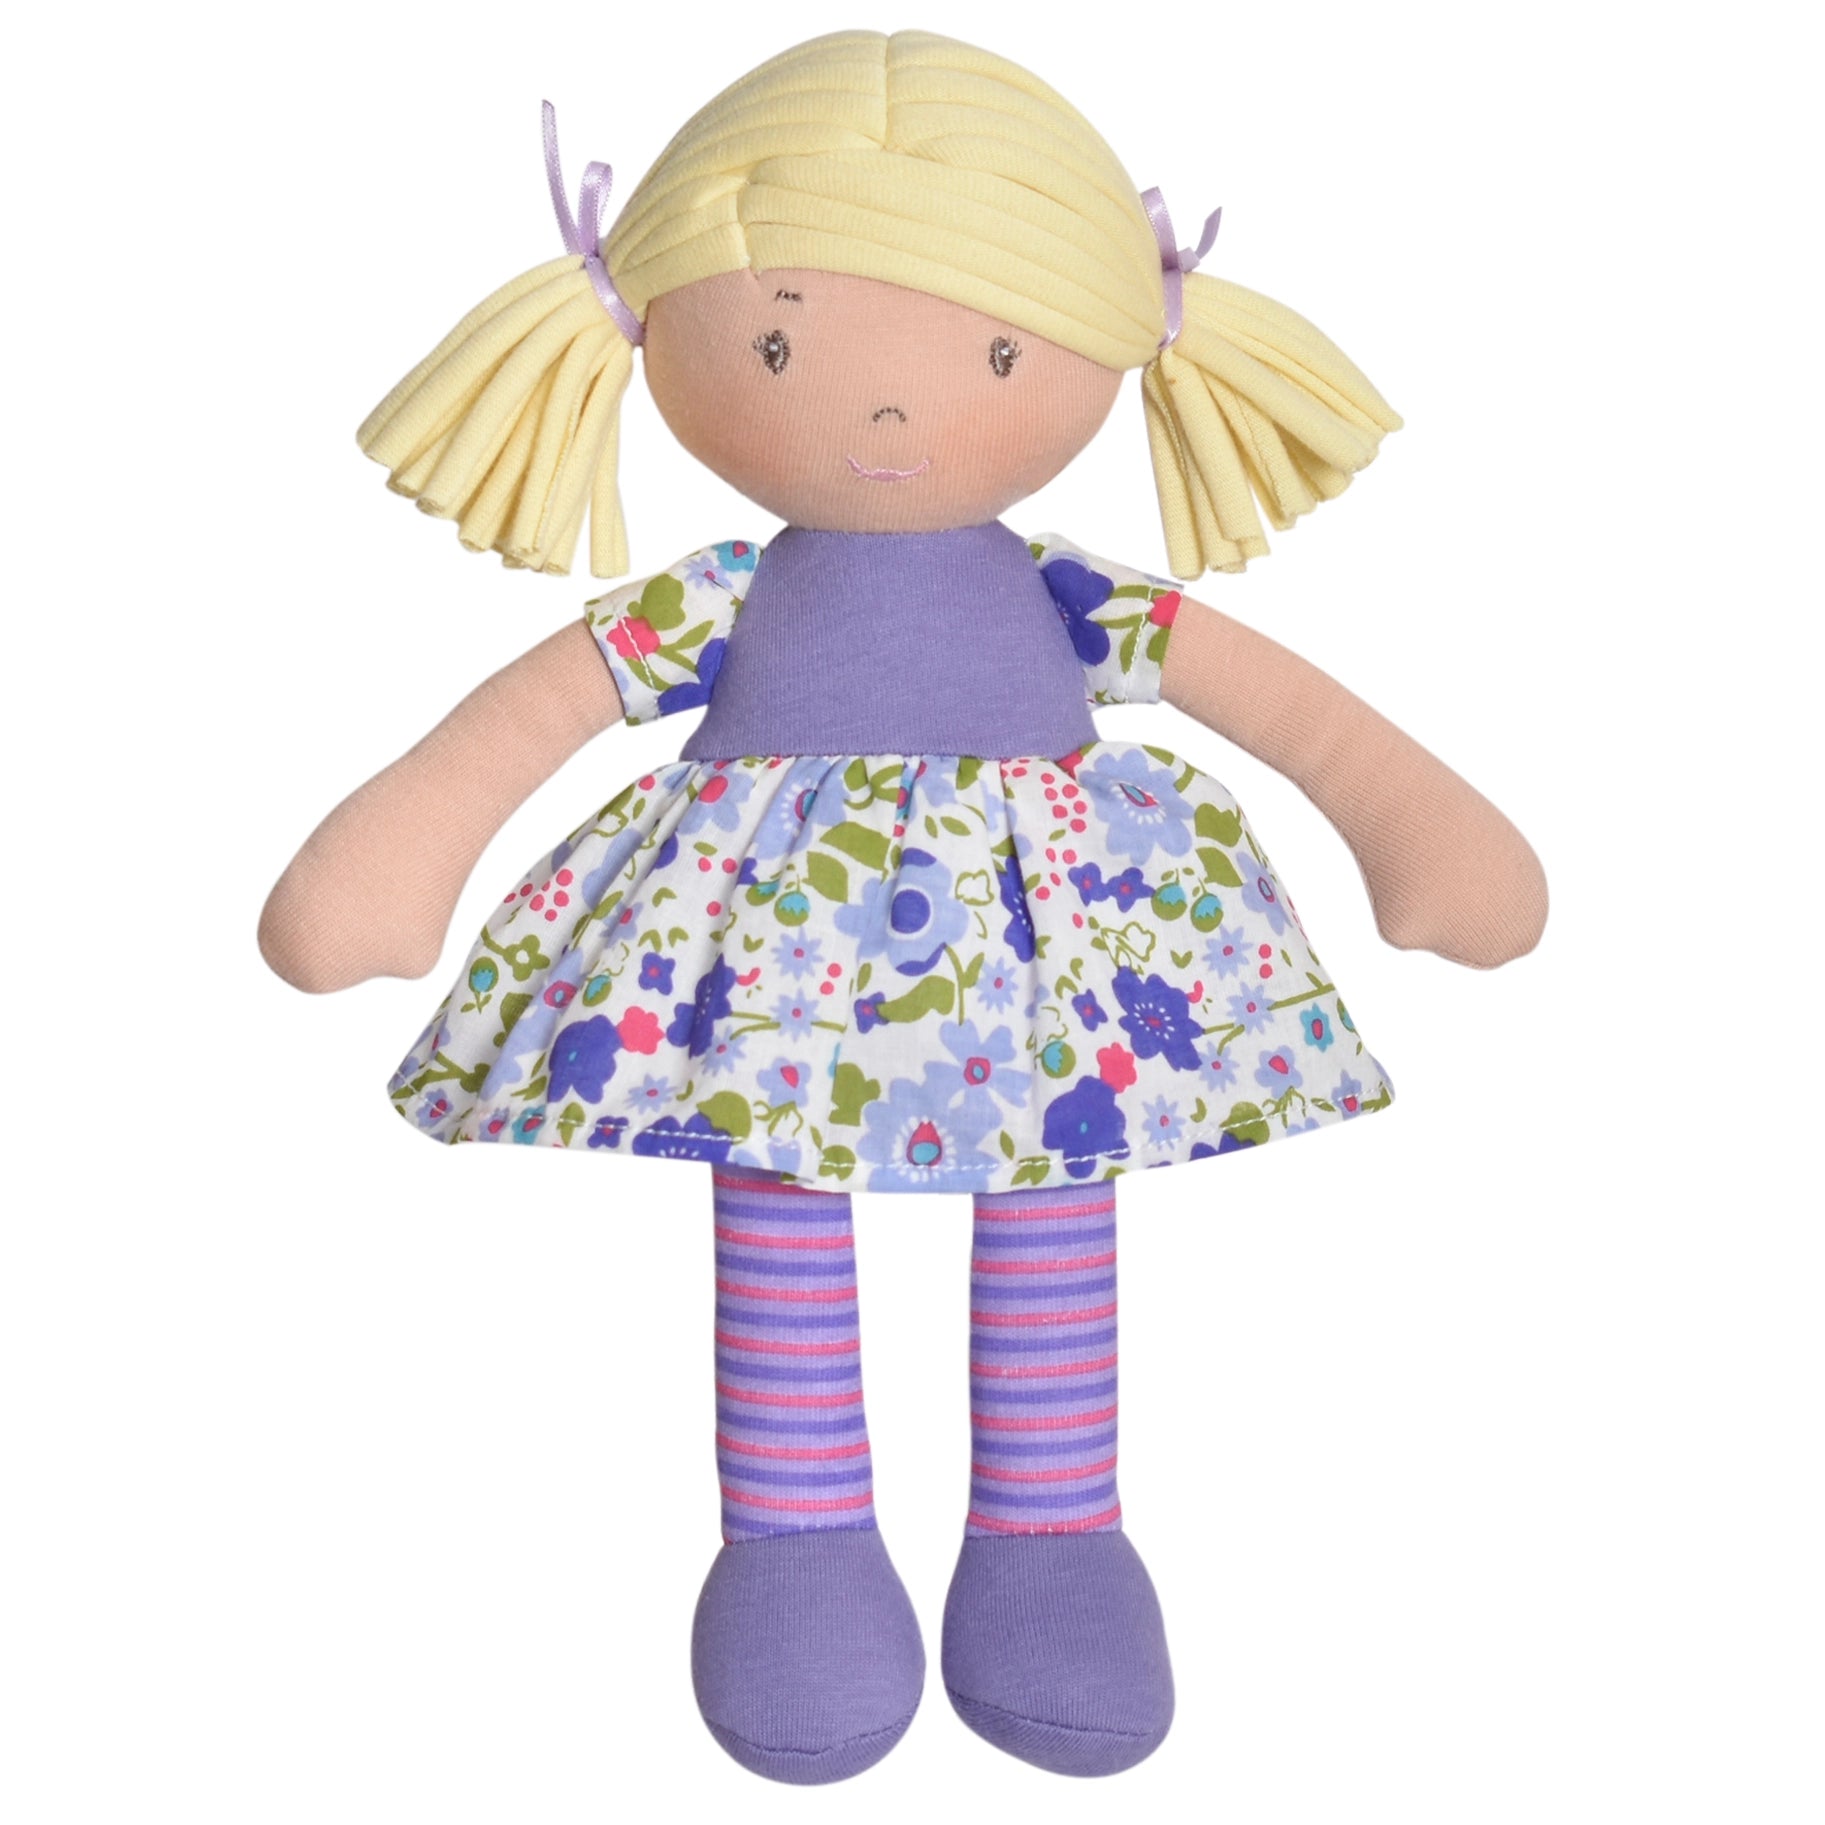 Lil'l Peggy - Blonde Hair with Lilac & Pink Dress